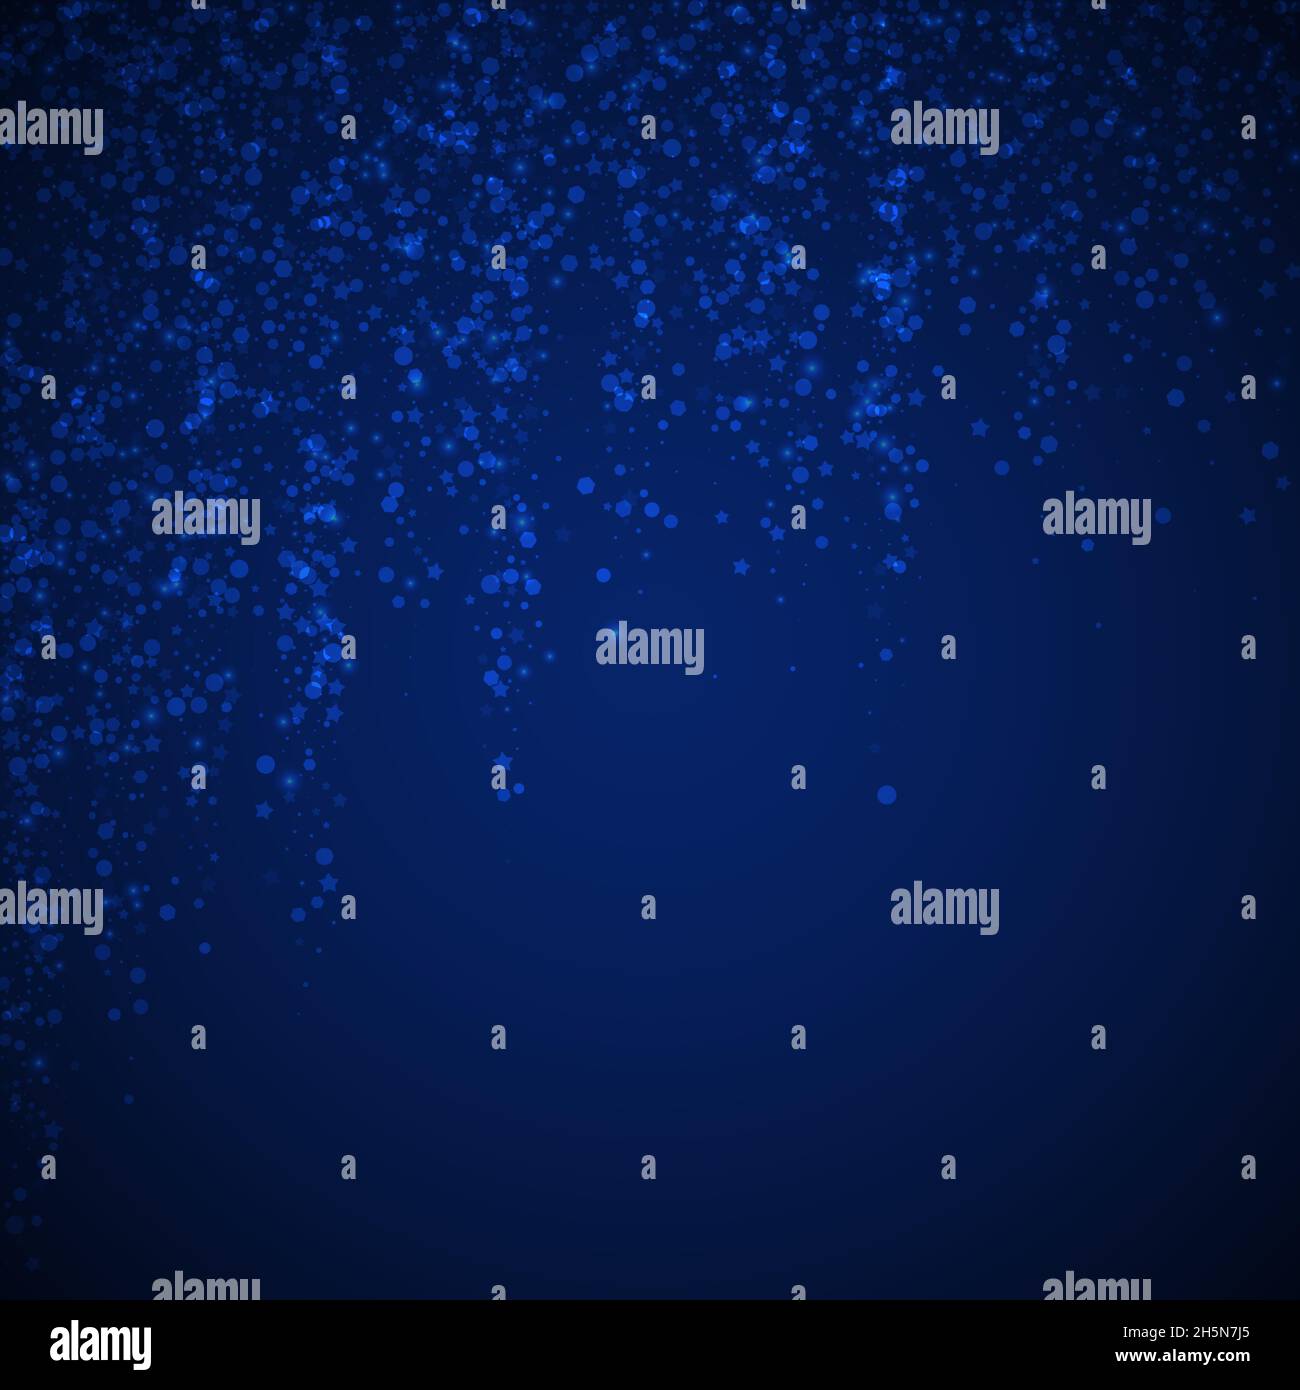 Magic stars sparse Christmas background. Subtle flying snow flakes and stars on dark blue night background. Adorable winter silver snowflake overlay t Stock Vector